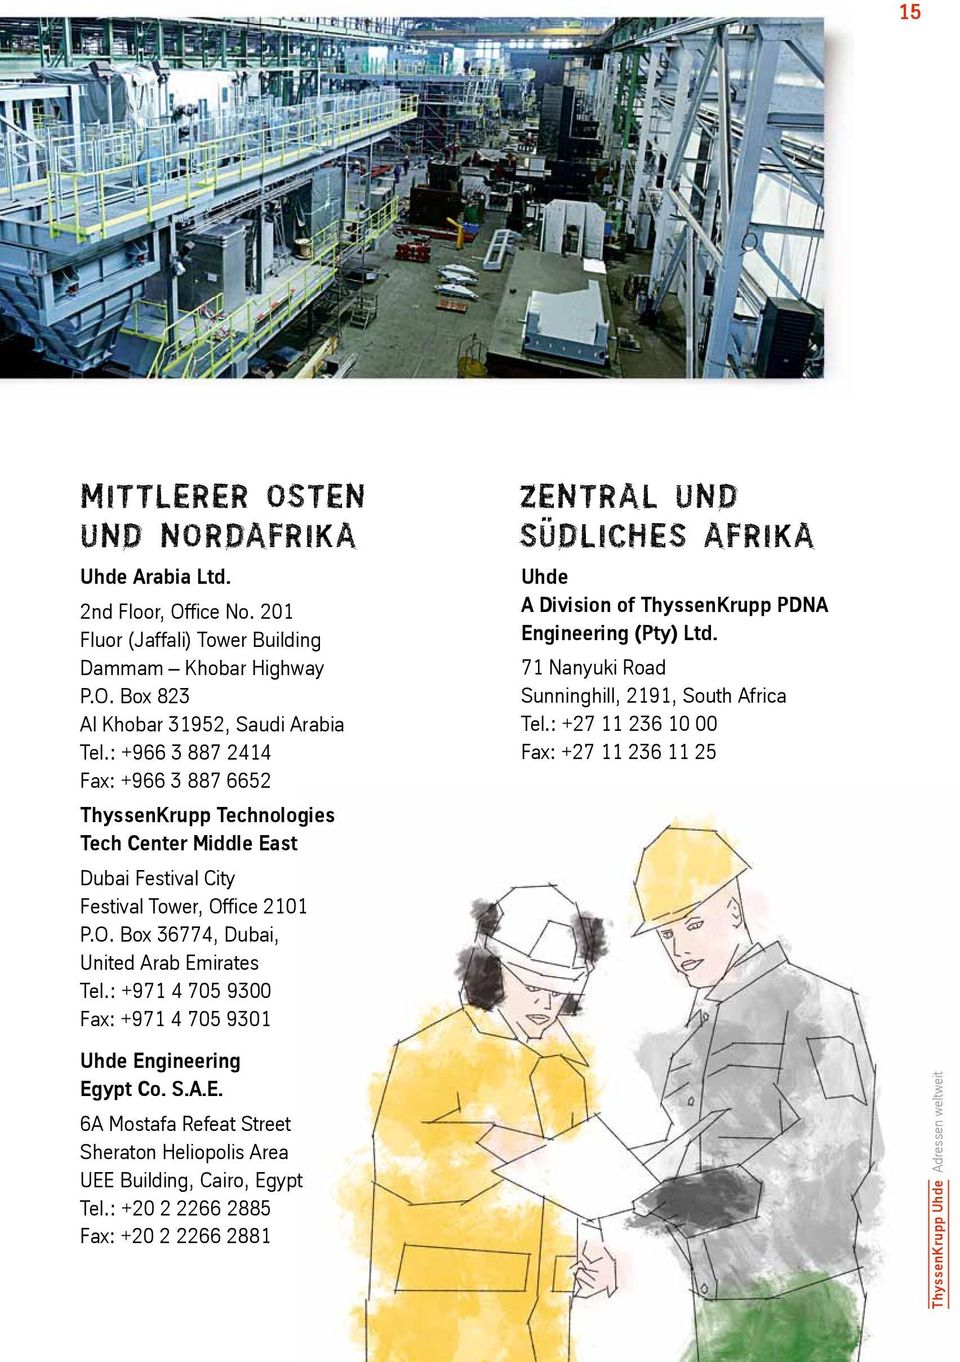 : +971 4 705 9300 Fax: +971 4 705 9301 ZENTRAL UND SÜDLICHES AFRIKA Uhde A Division of ThyssenKrupp pdna Engineering (pty) Ltd. 71 Nanyuki Road Sunninghill, 2191, South Africa Tel.